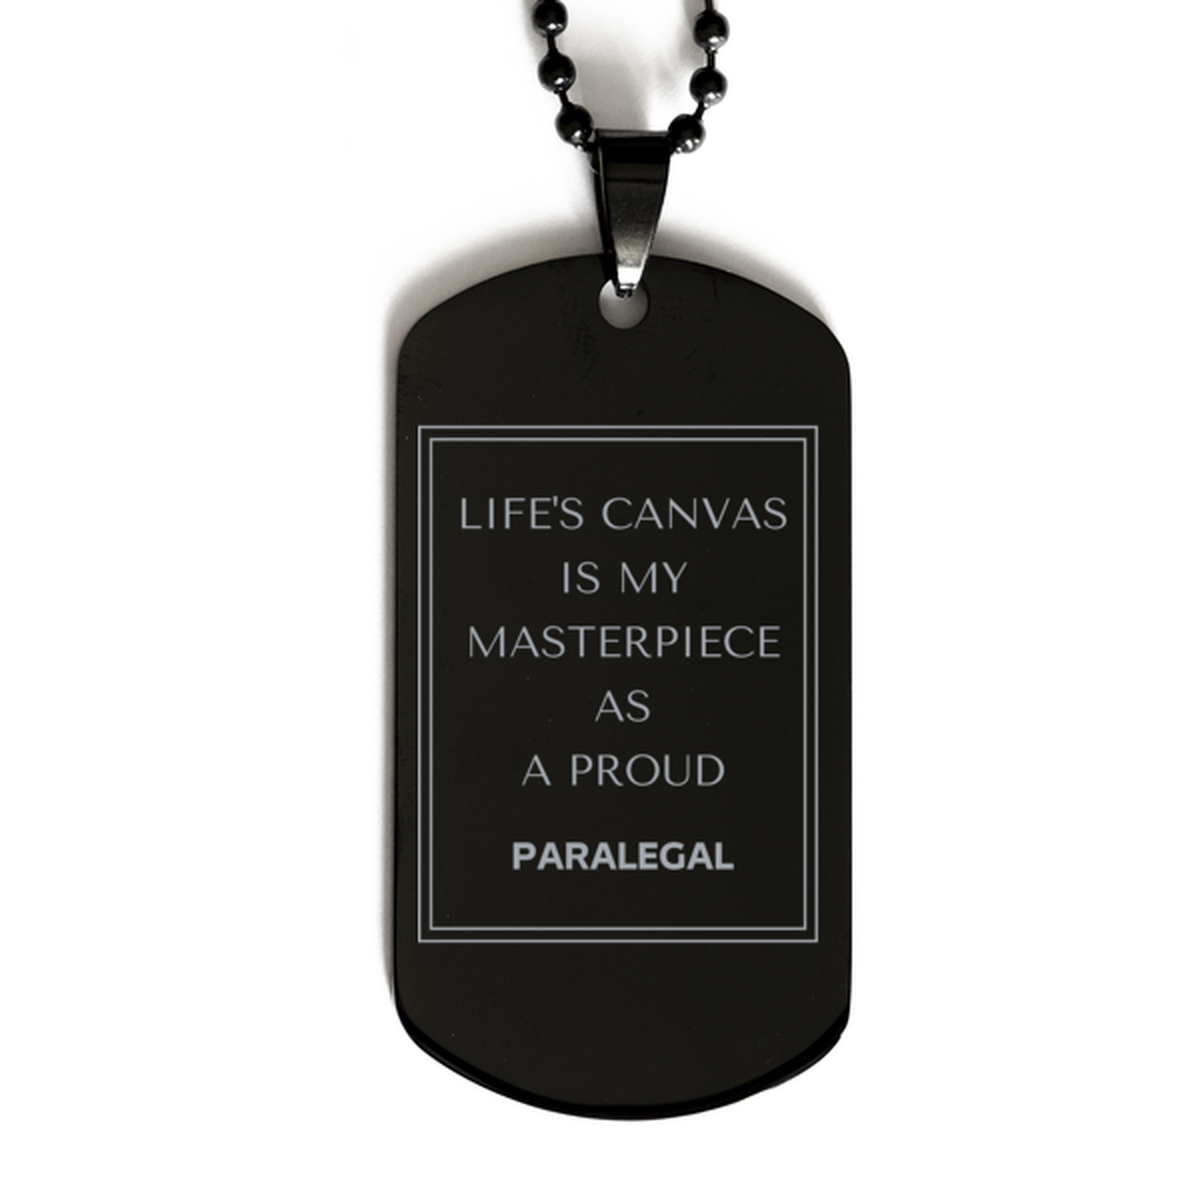 Proud Paralegal Gifts, Life's canvas is my masterpiece, Epic Birthday Christmas Unique Black Dog Tag For Paralegal, Coworkers, Men, Women, Friends